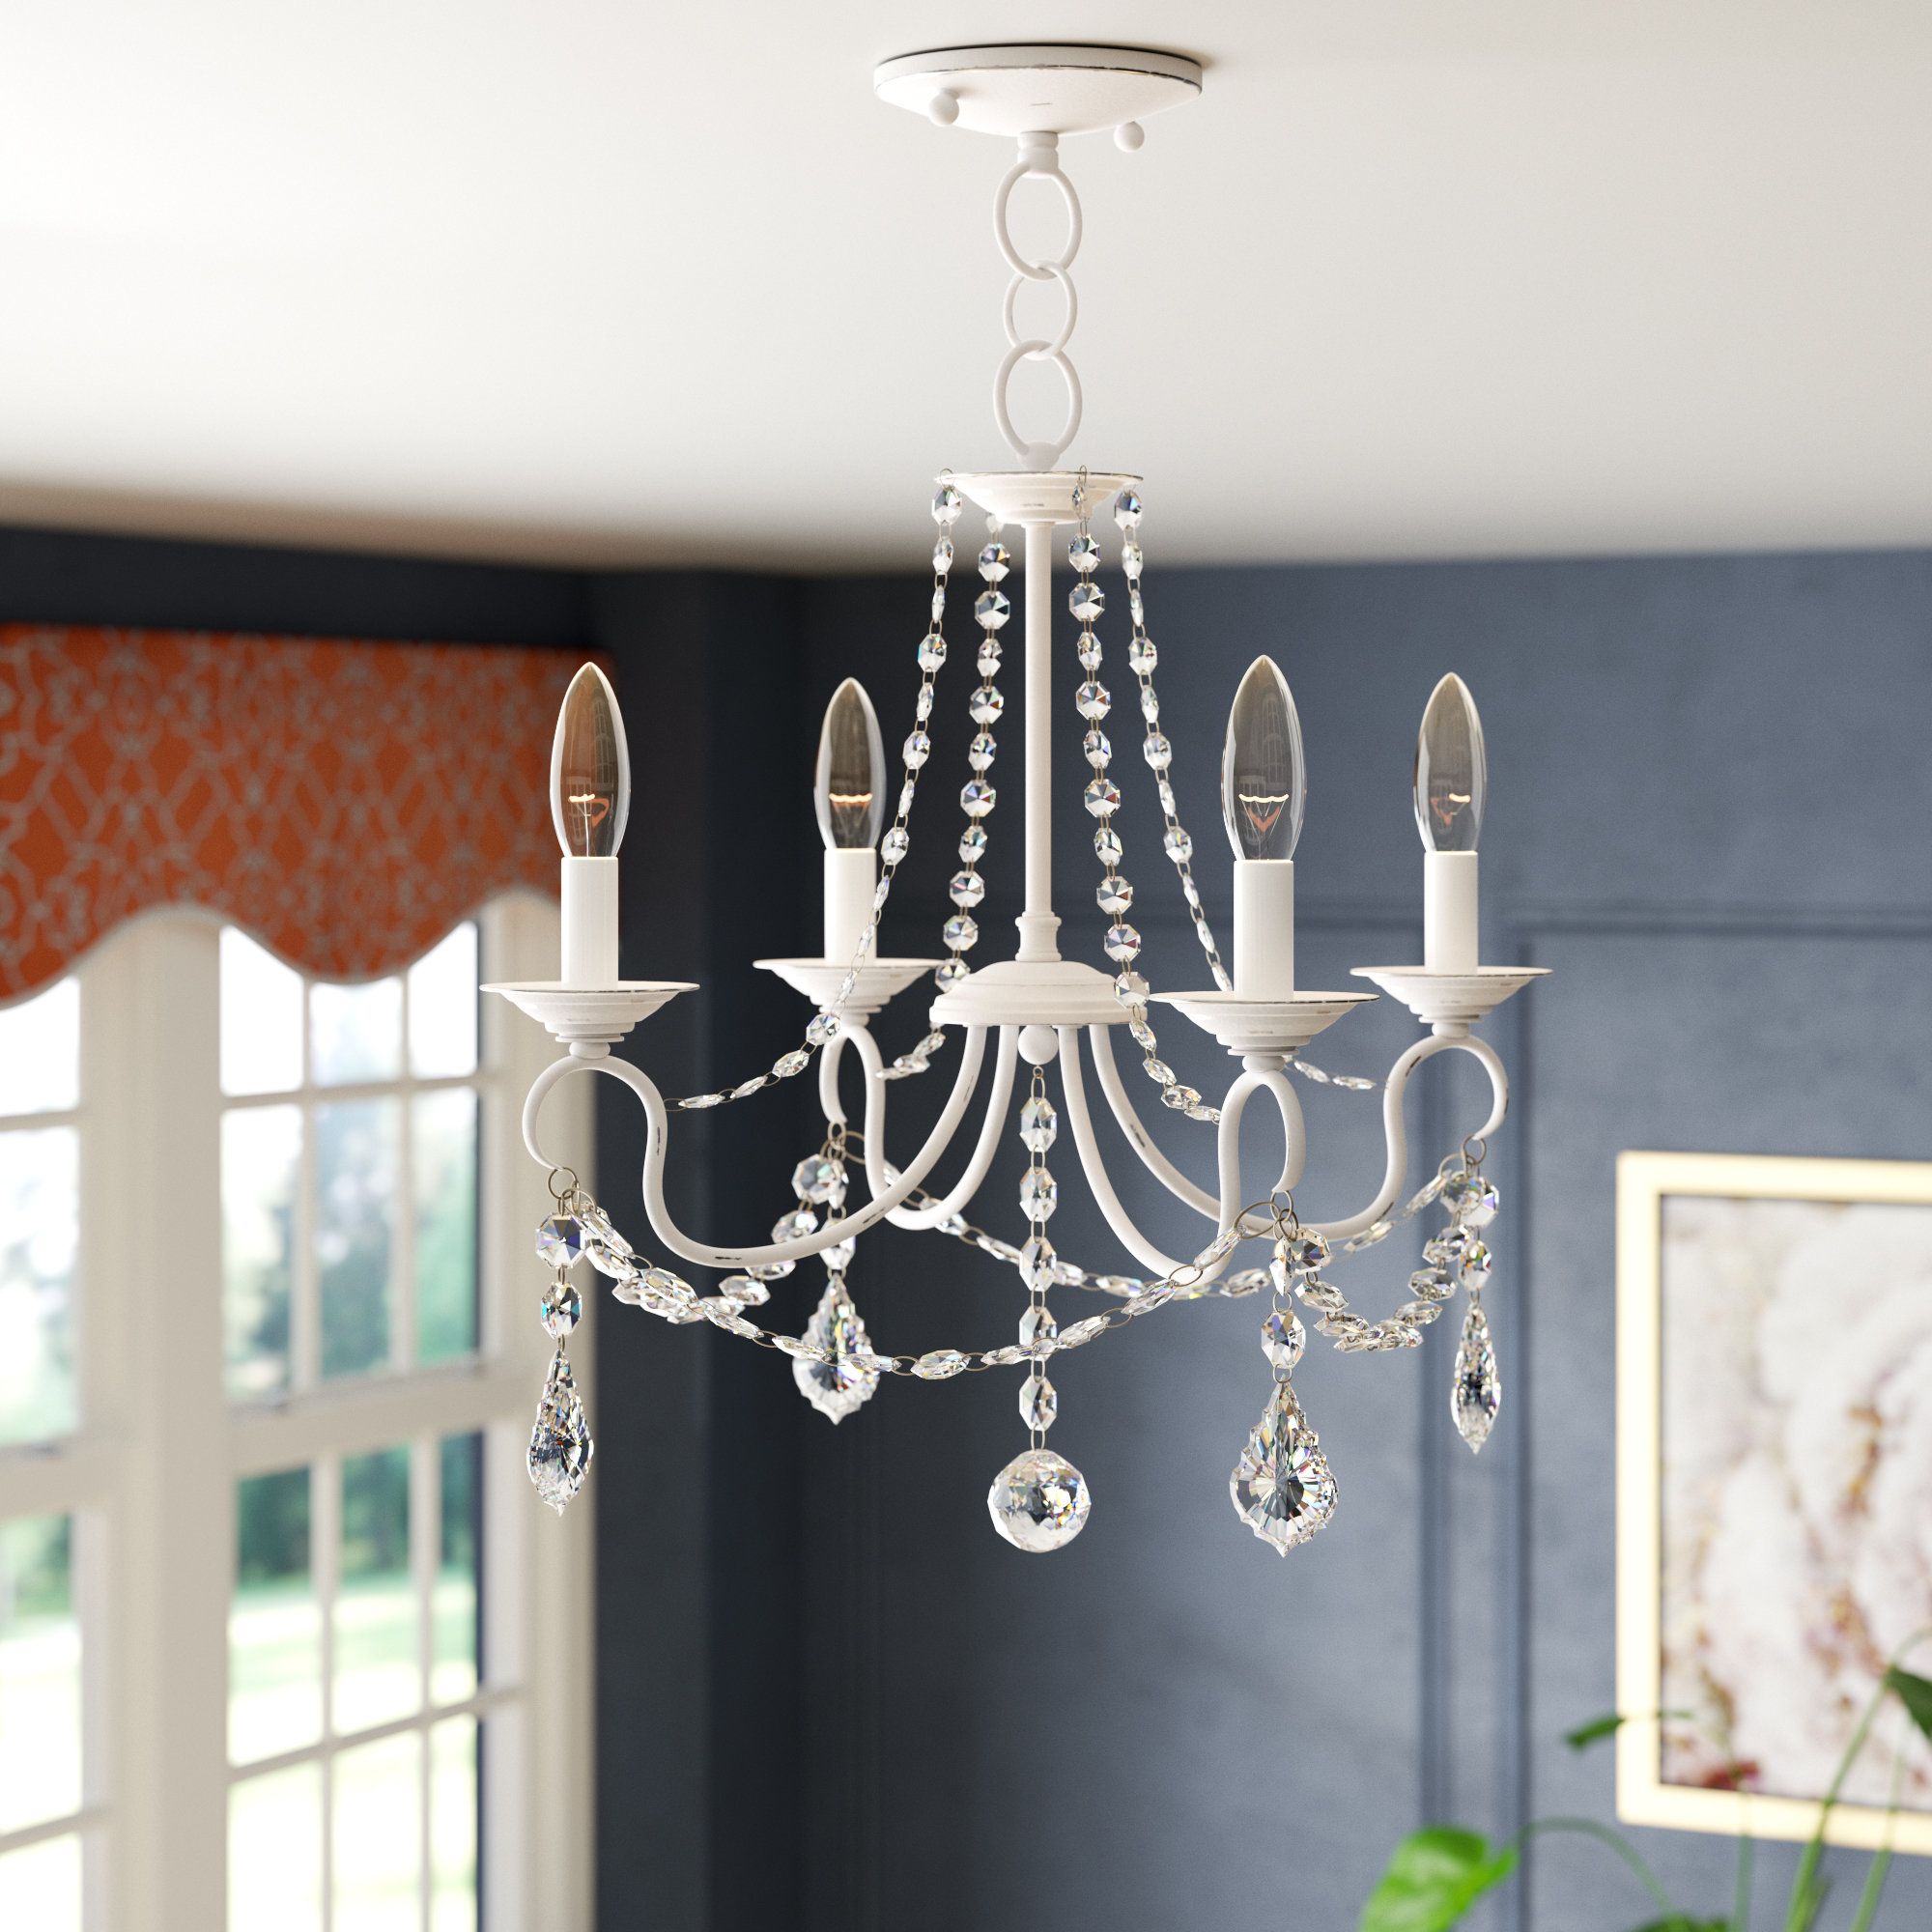 Devana 4 Light Candle Style Chandelier With Aldora 4 Light Candle Style Chandeliers (View 9 of 30)